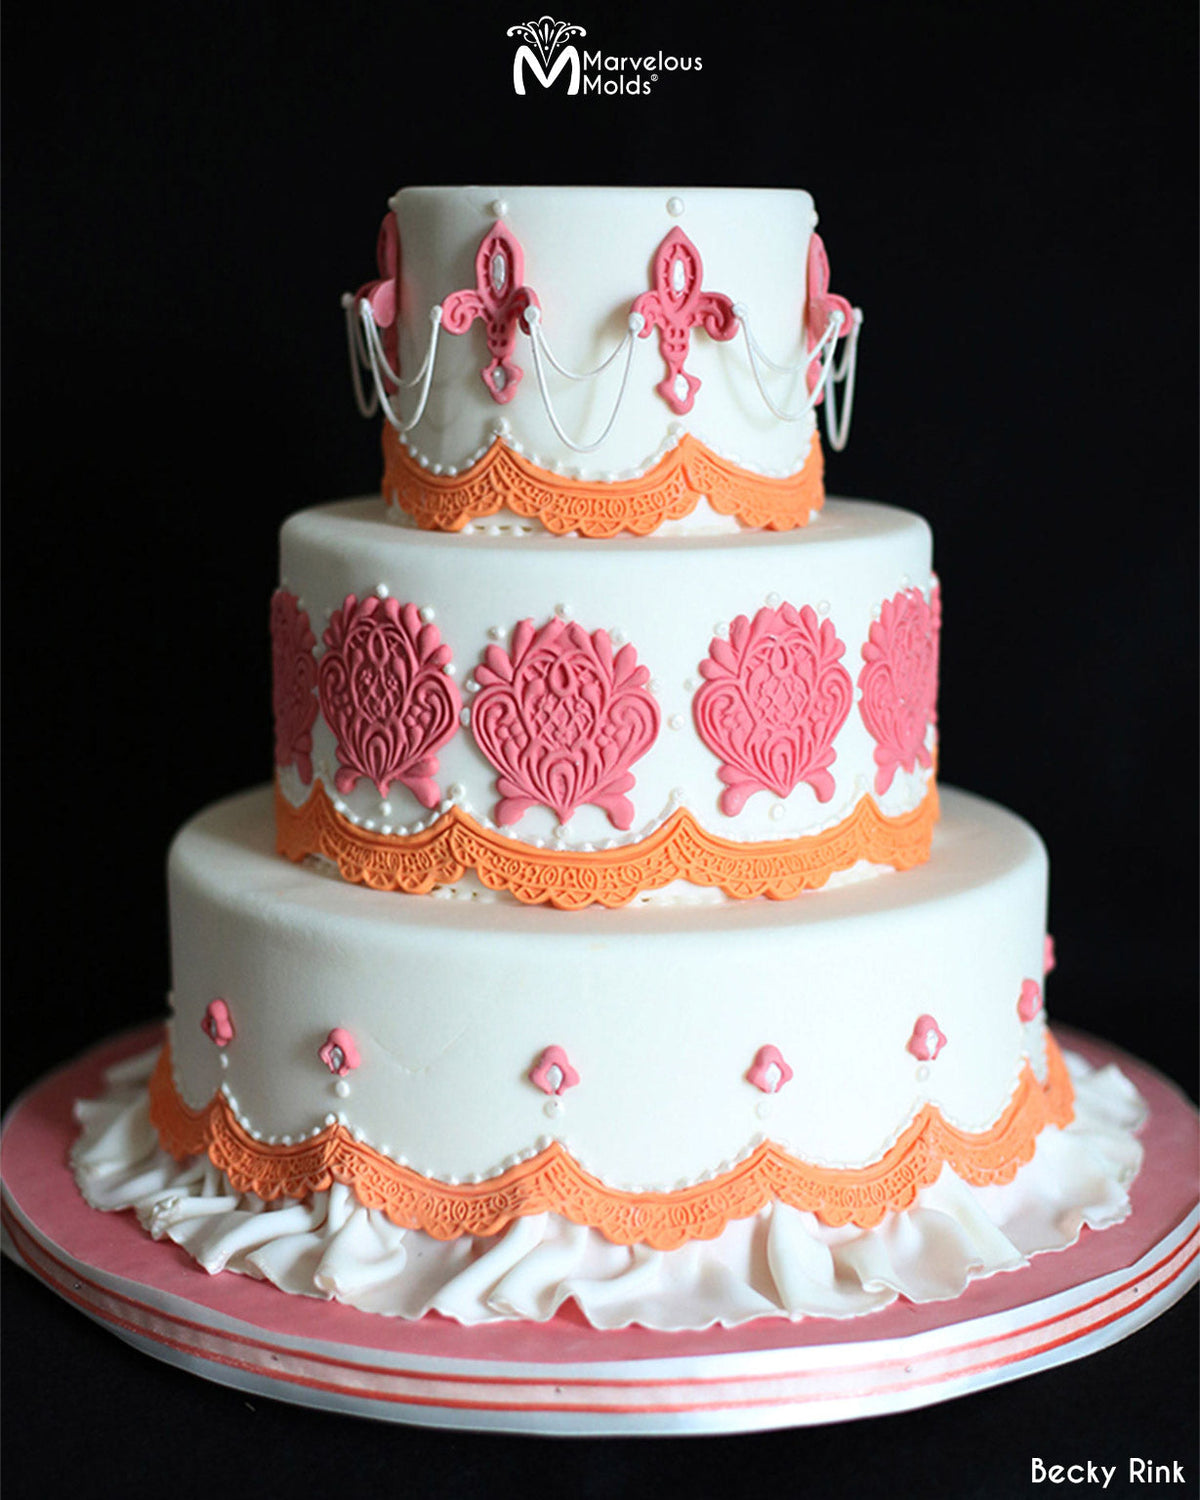 Pink Lace Cake Decorated Using the Marvelous Molds Glenda Lace Silicone Mold